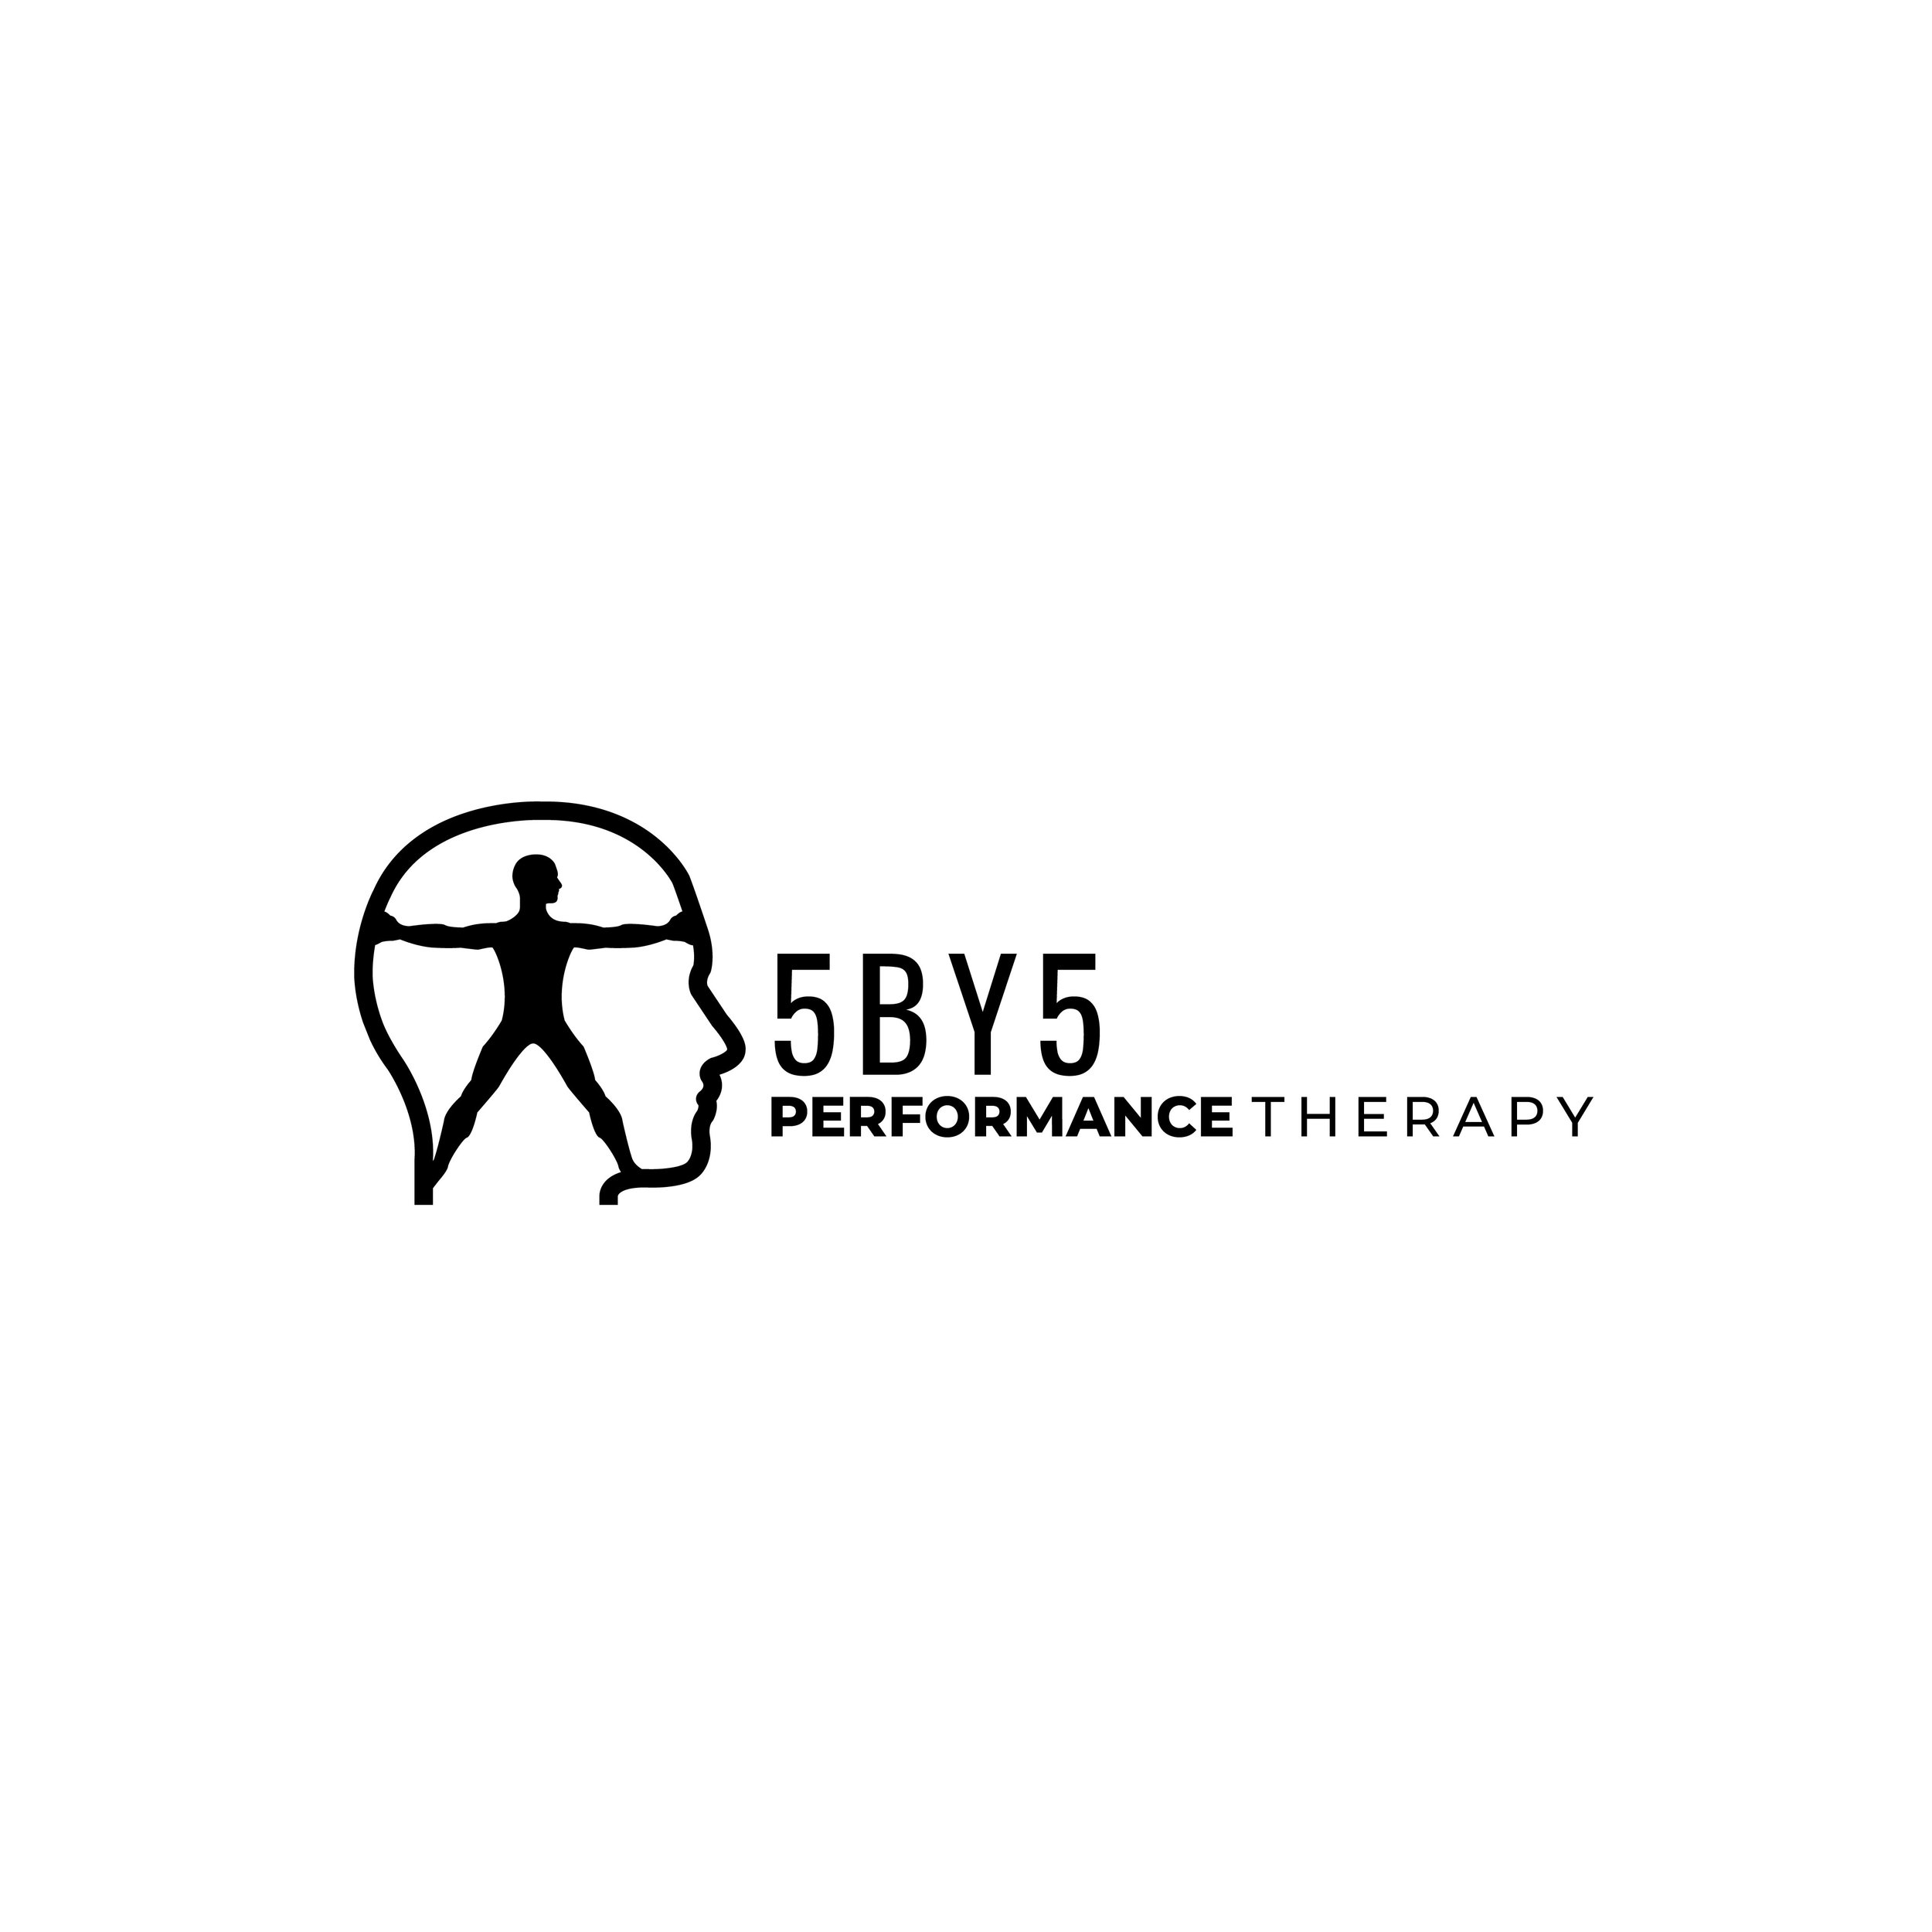 5BY5 Performance Therapy